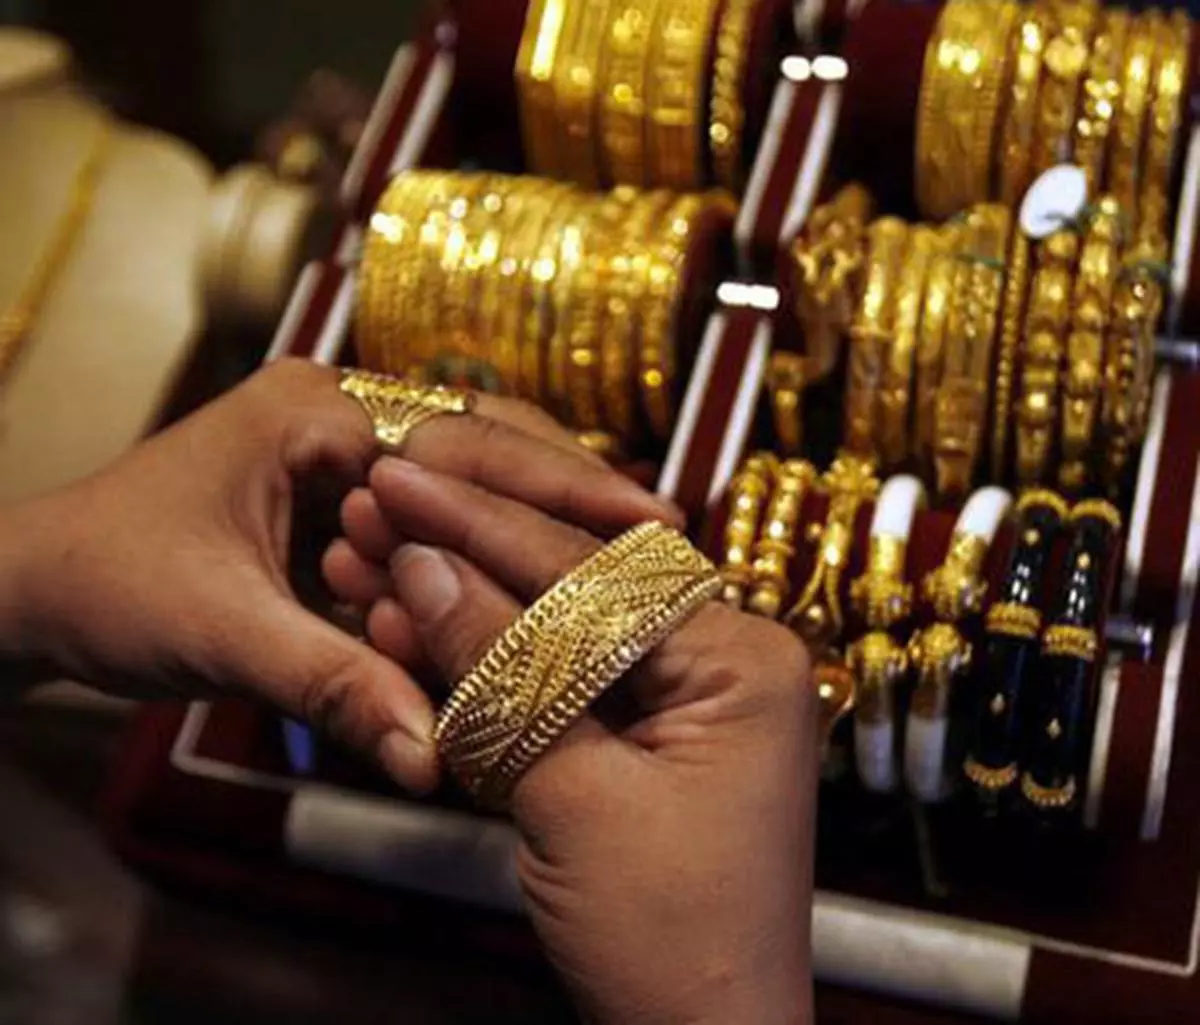 Unlike treasury bonds, gold is not an interest-bearing asset, and its attraction falls when safe alternatives like US treasury bonds begin to yield more